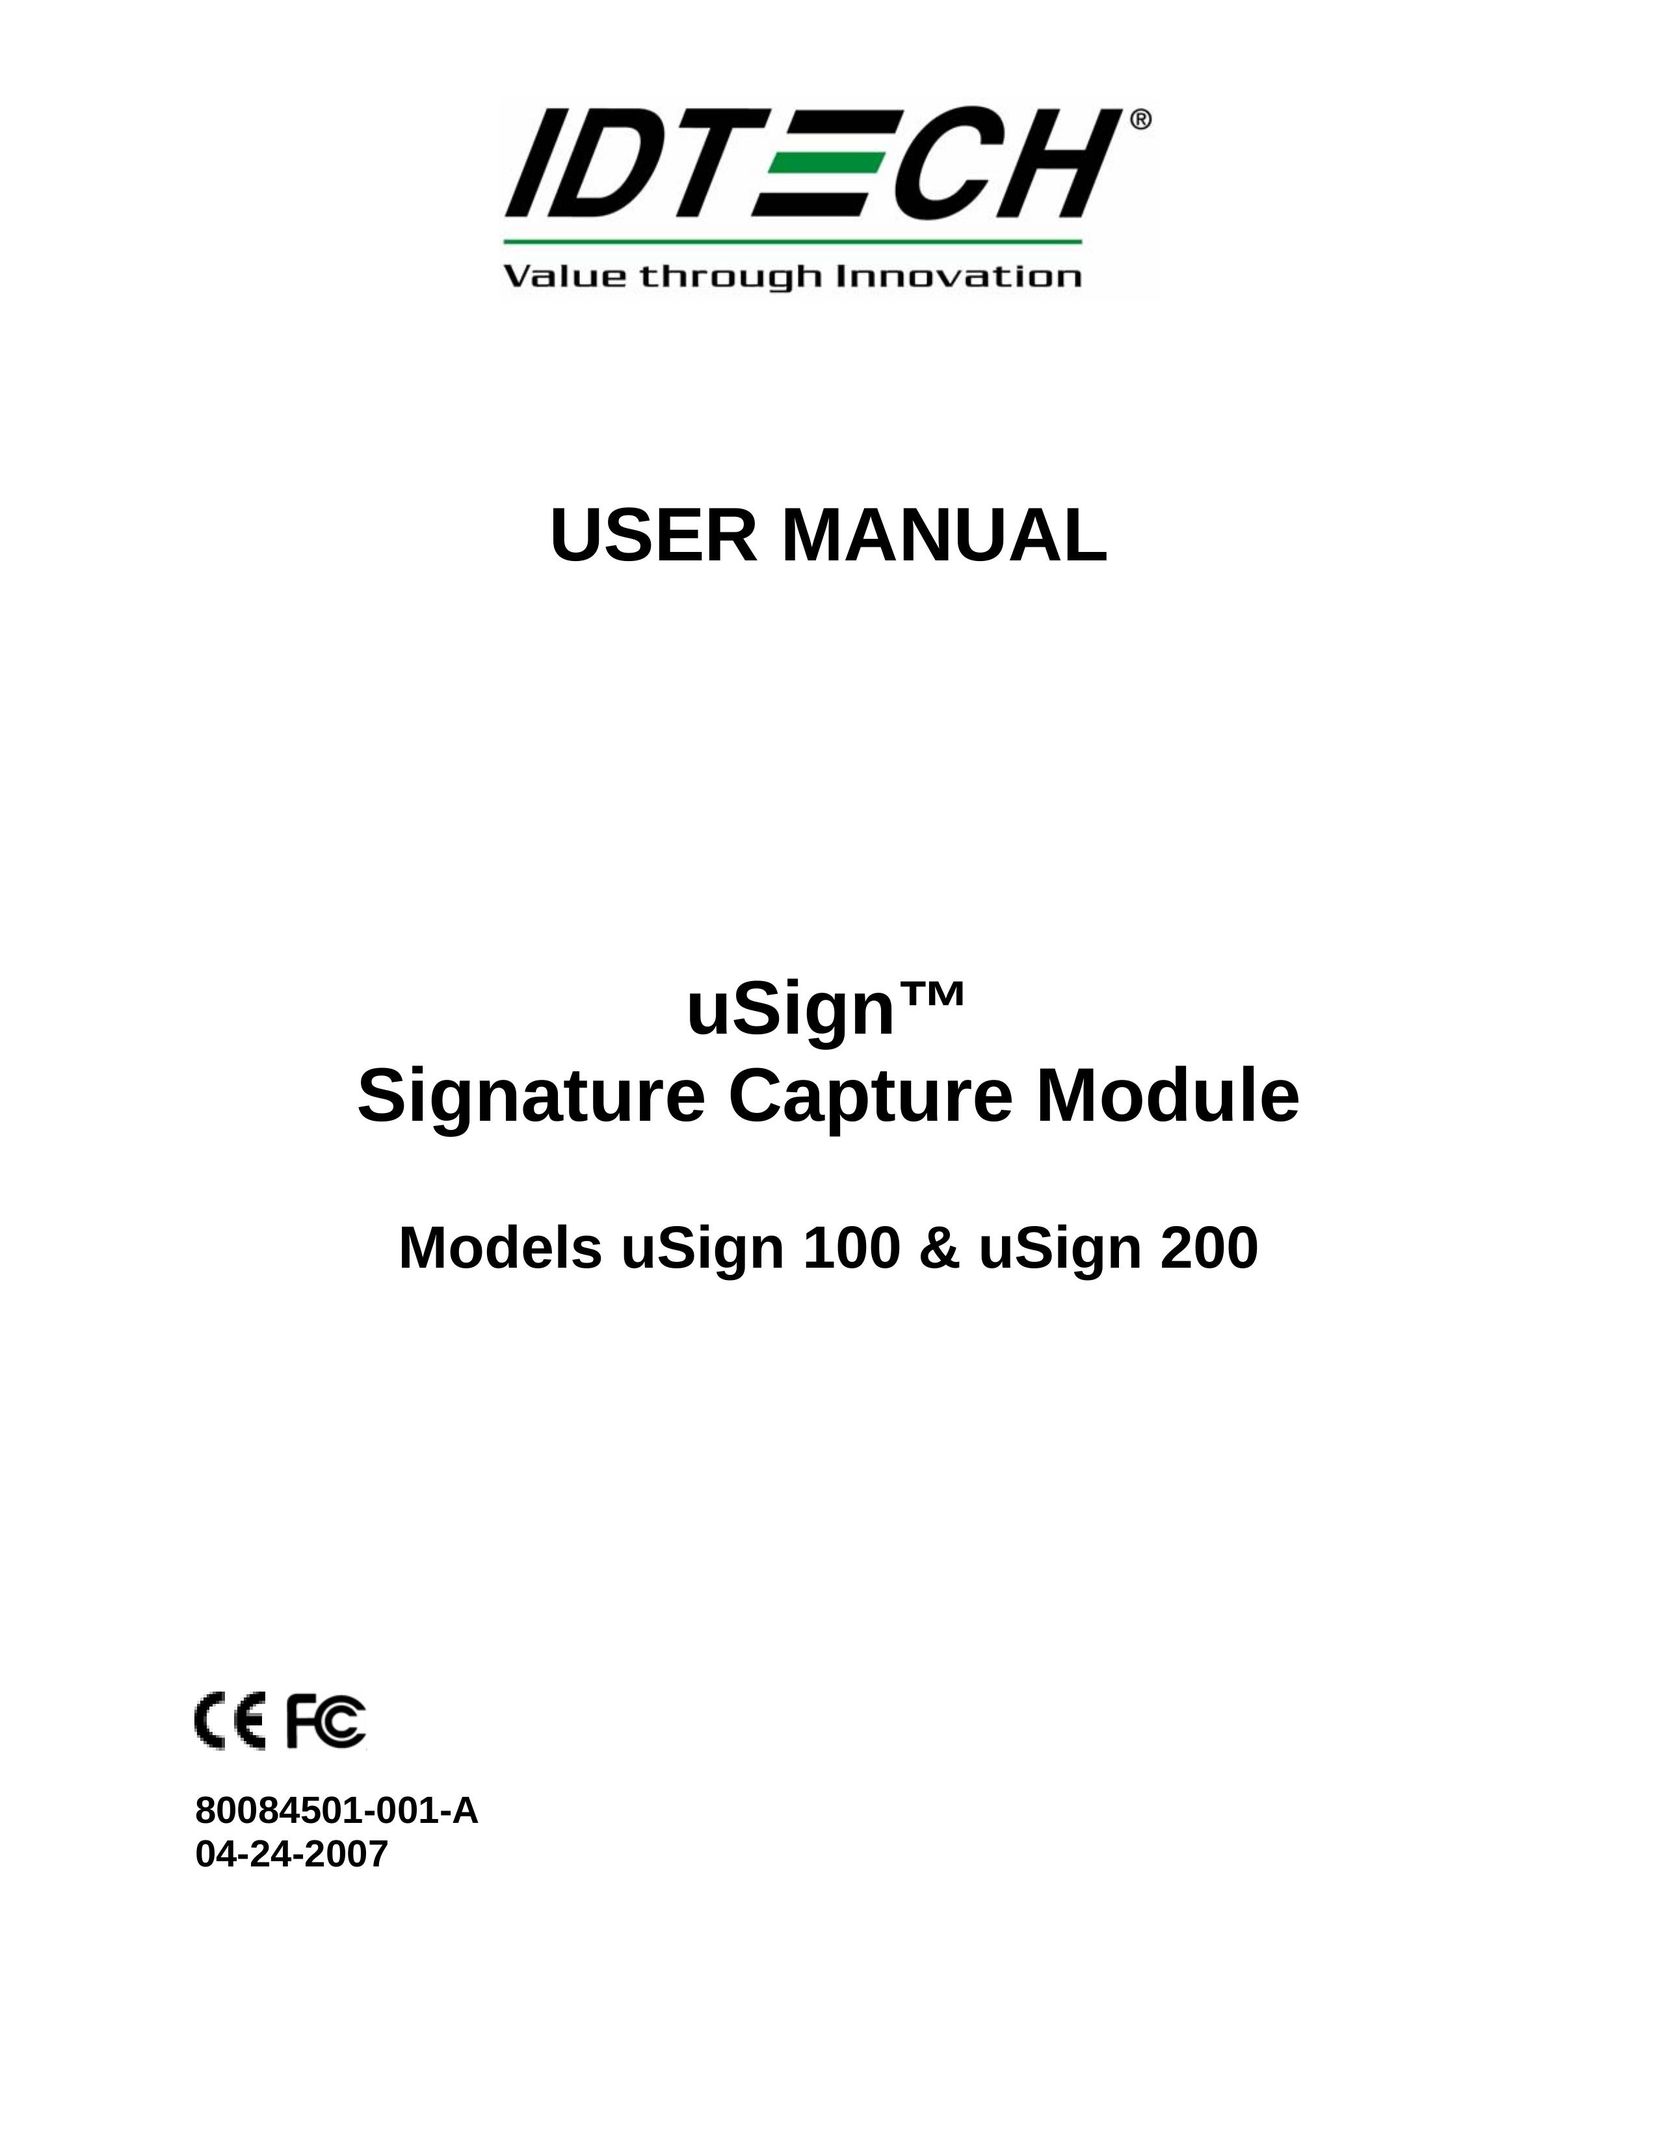 Compaq uSign 200 Network Router User Manual